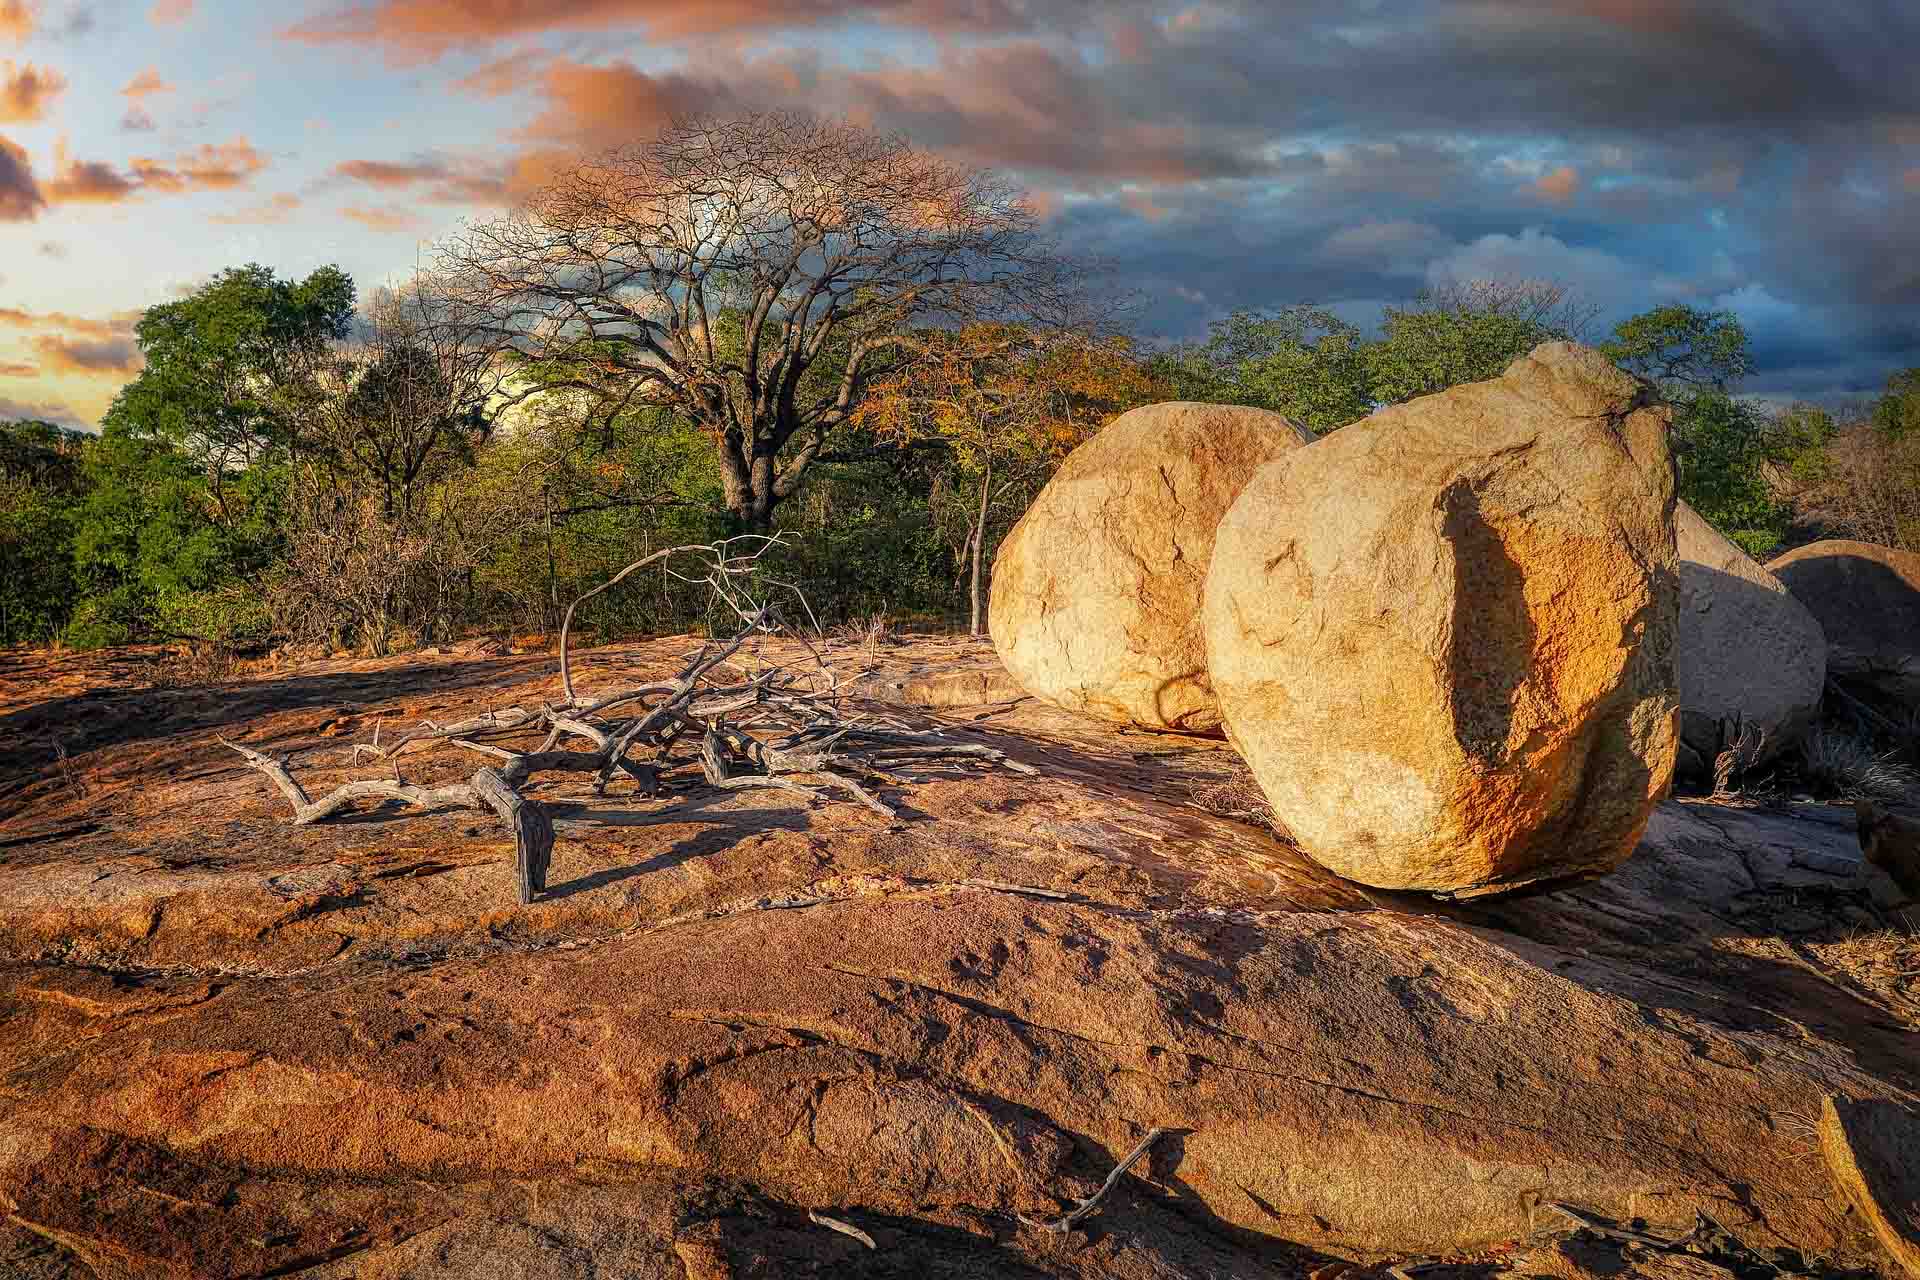 Balancing rocks in Matobo National Park, Zimbabwe, formed by millions of years of weathering